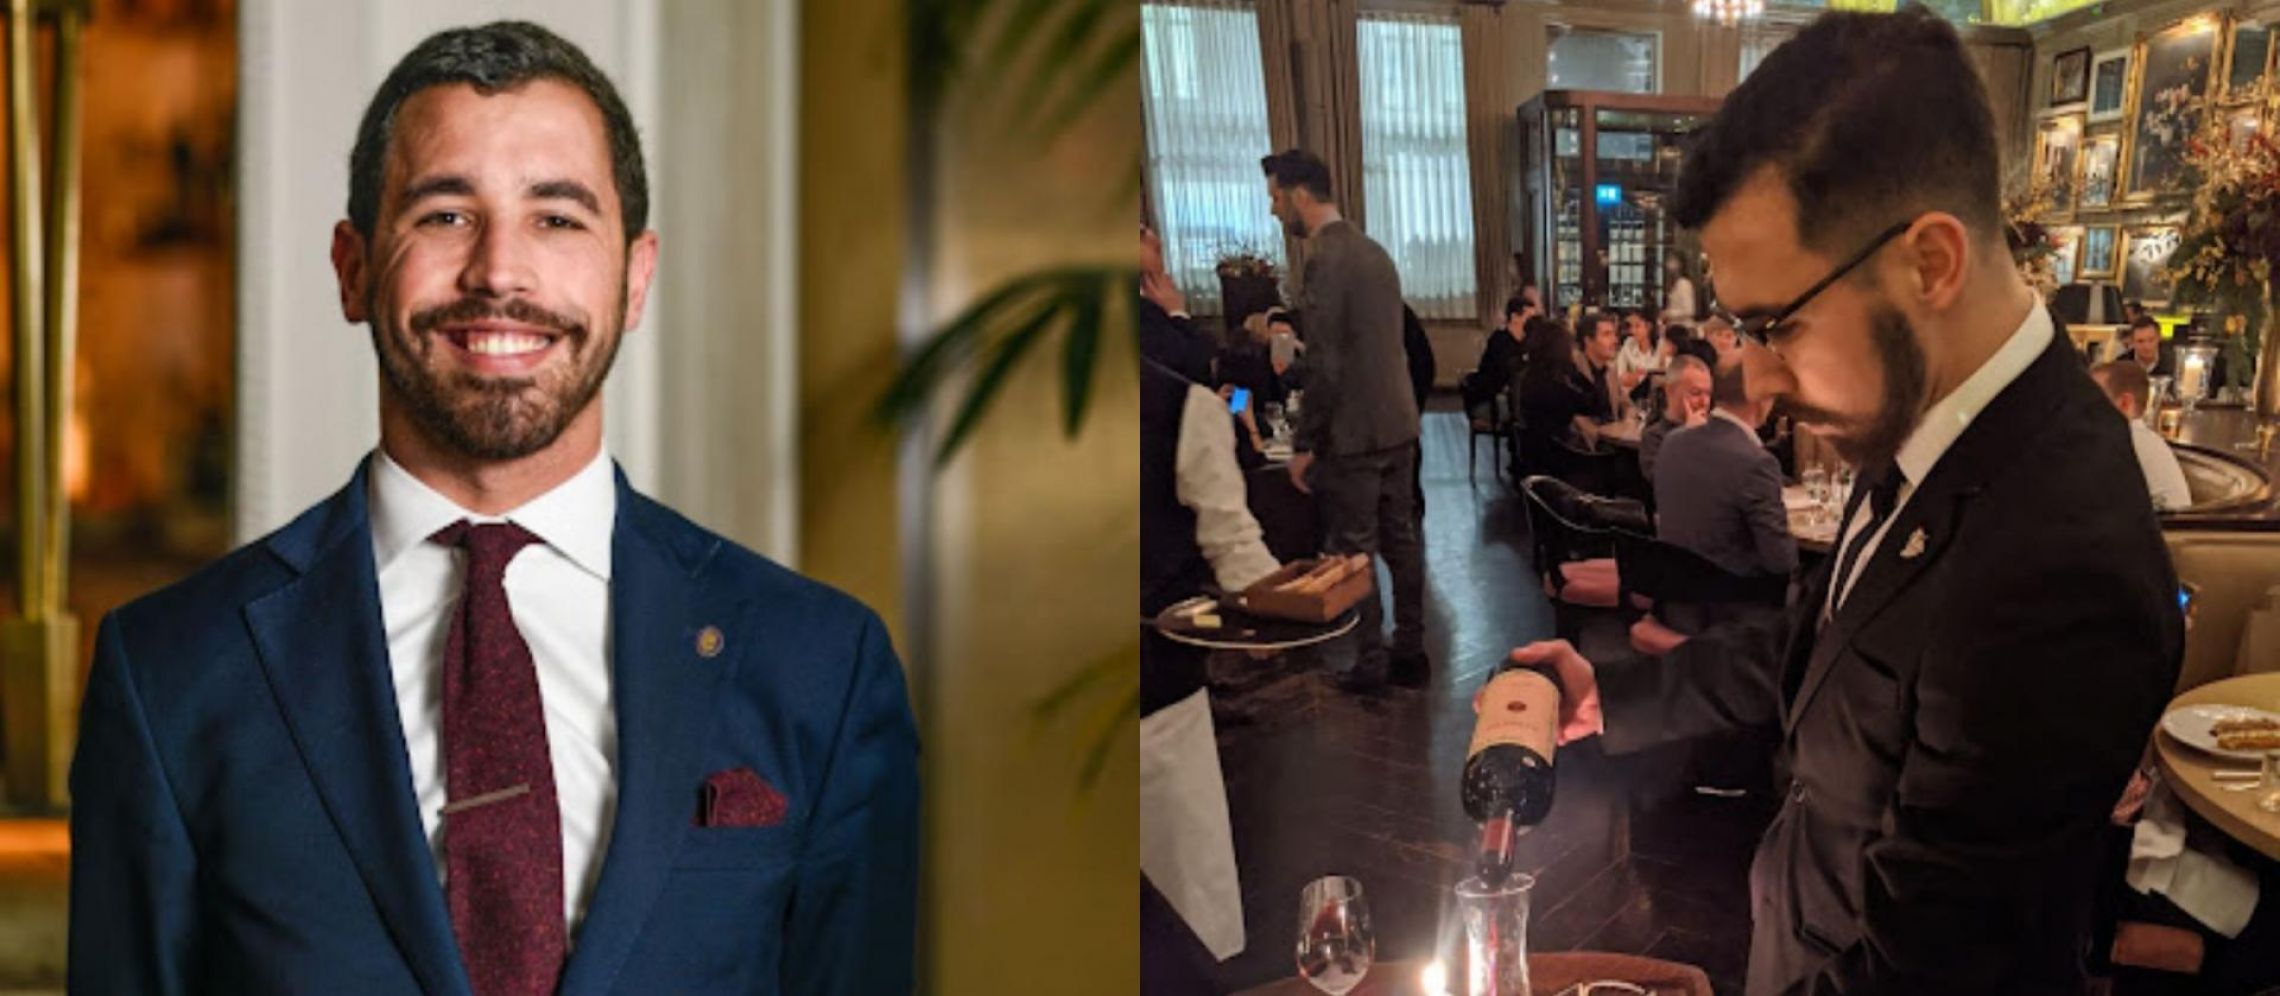 Photo for: An Interview with Vitor Silva, Head Sommelier at Le Comptoir Robuchon, Mayfair.